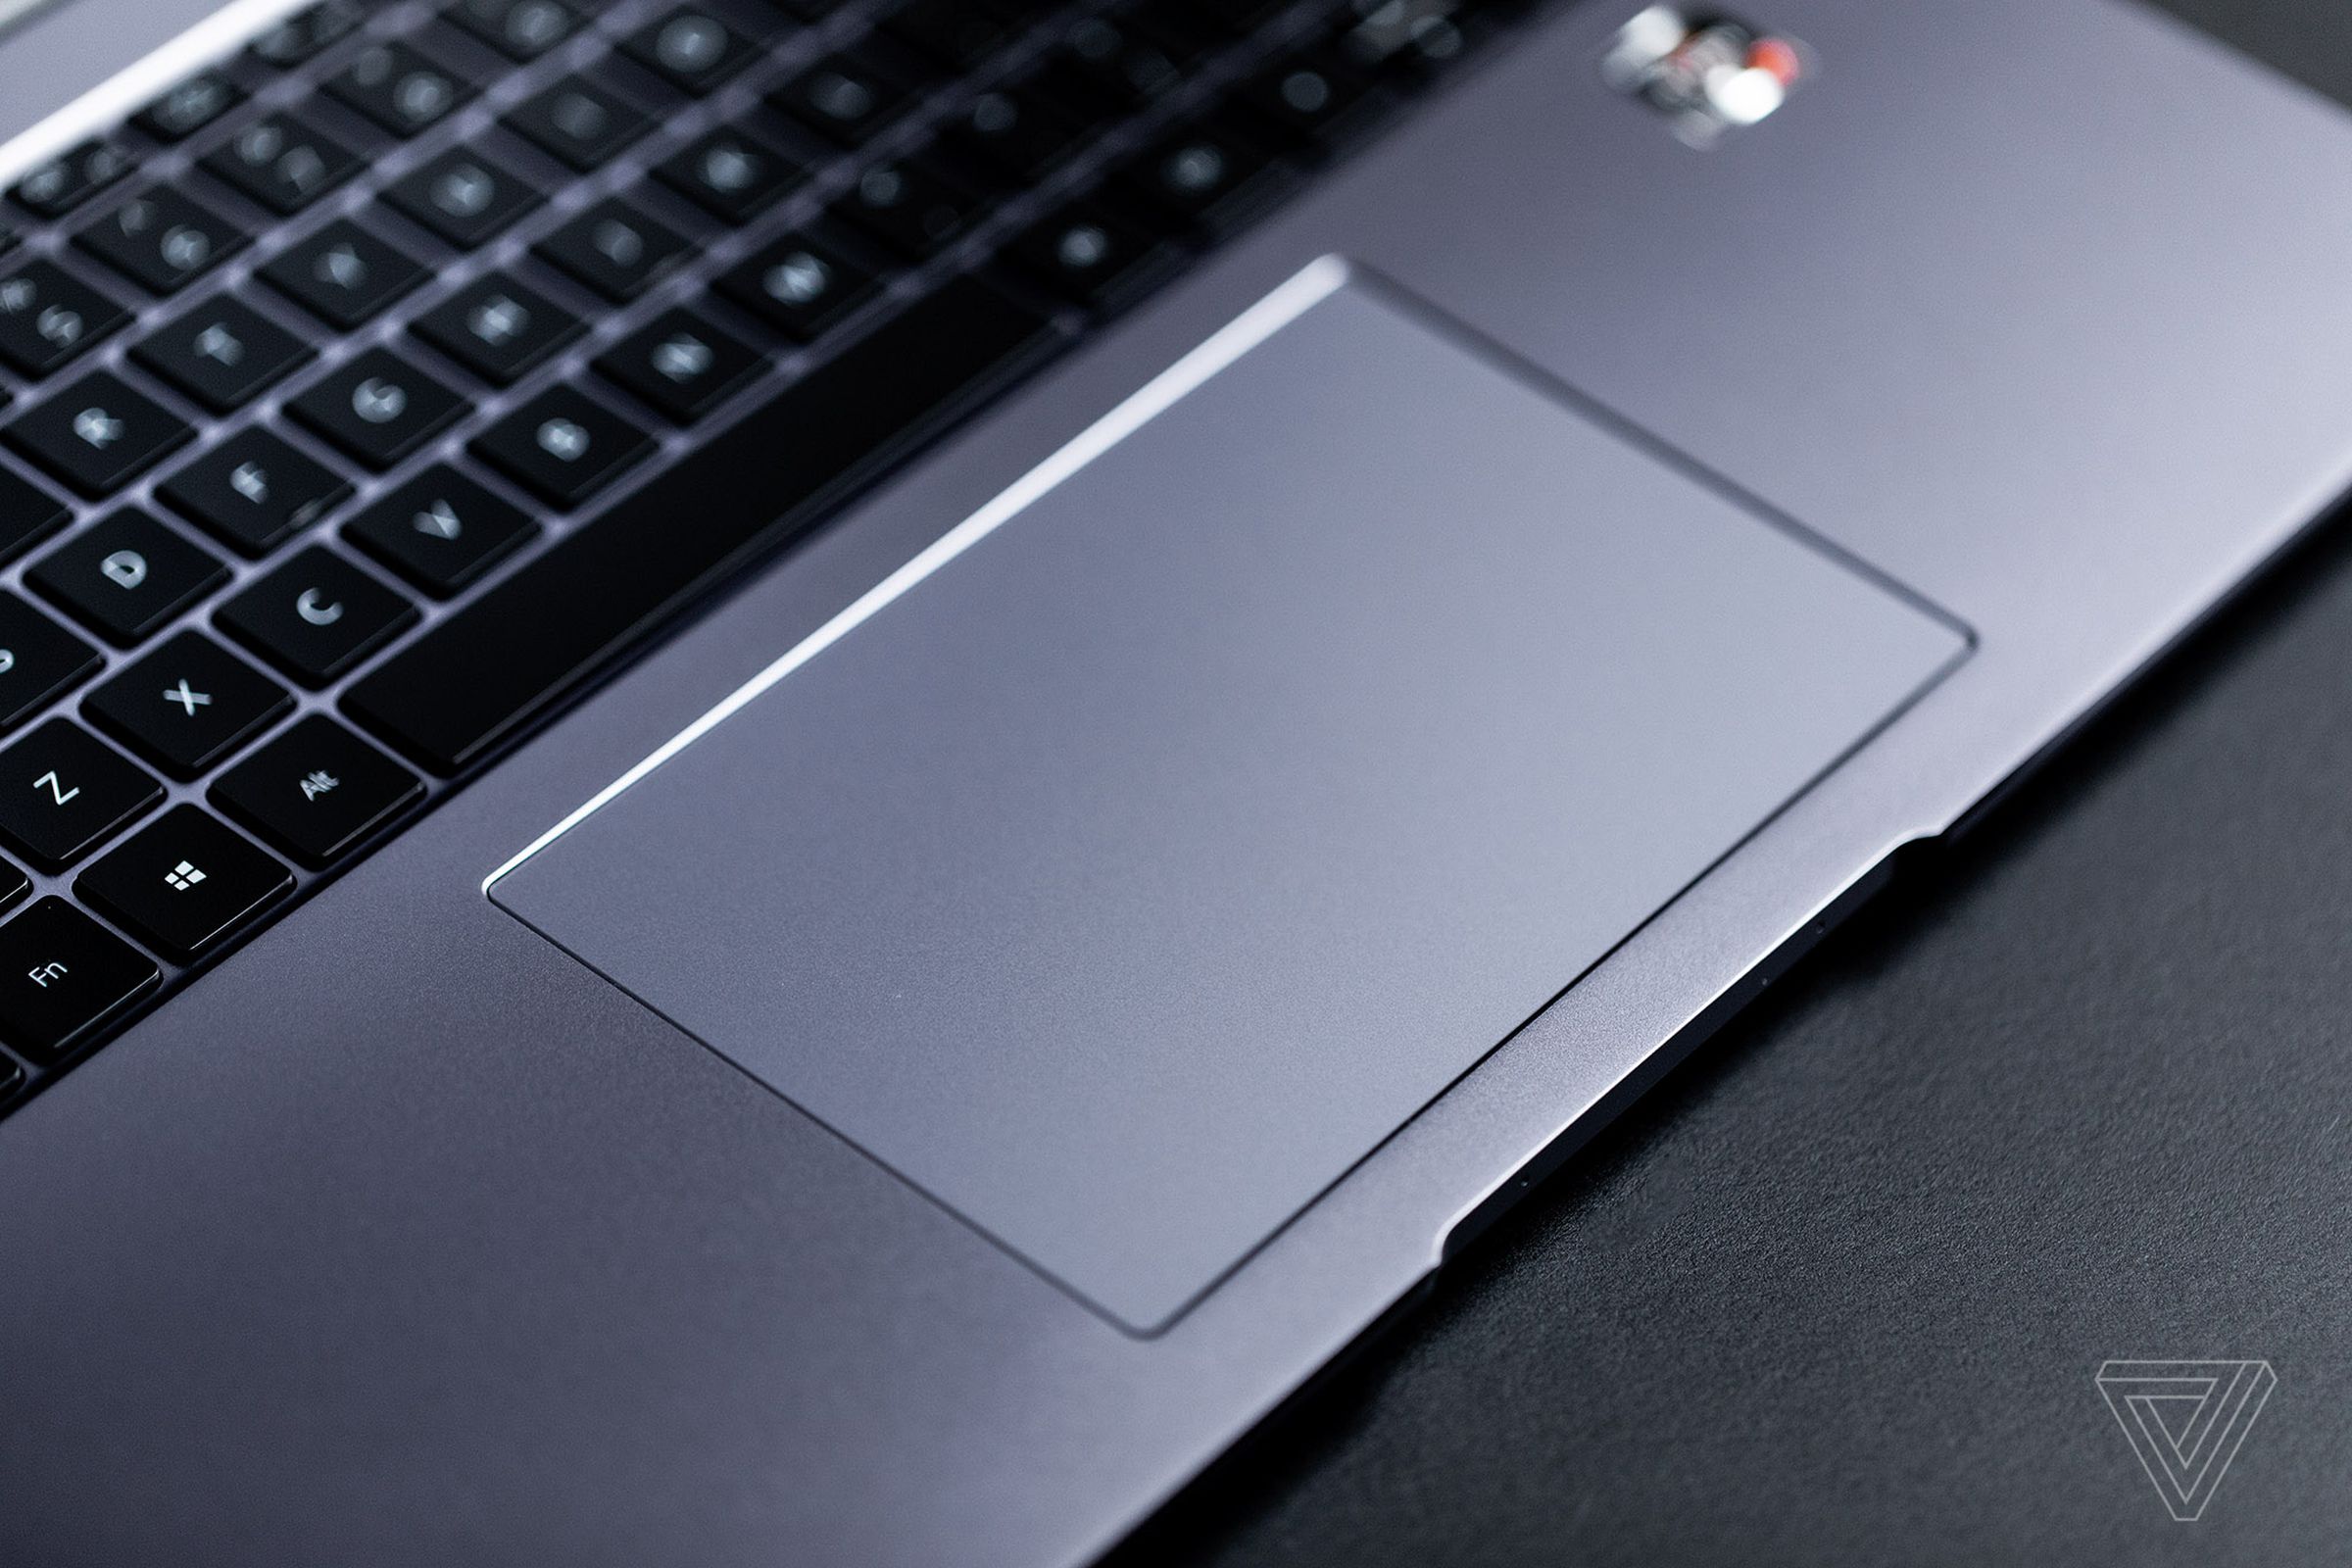 The touchpad on the Huawei MateBook 16 seen from above and to the left.